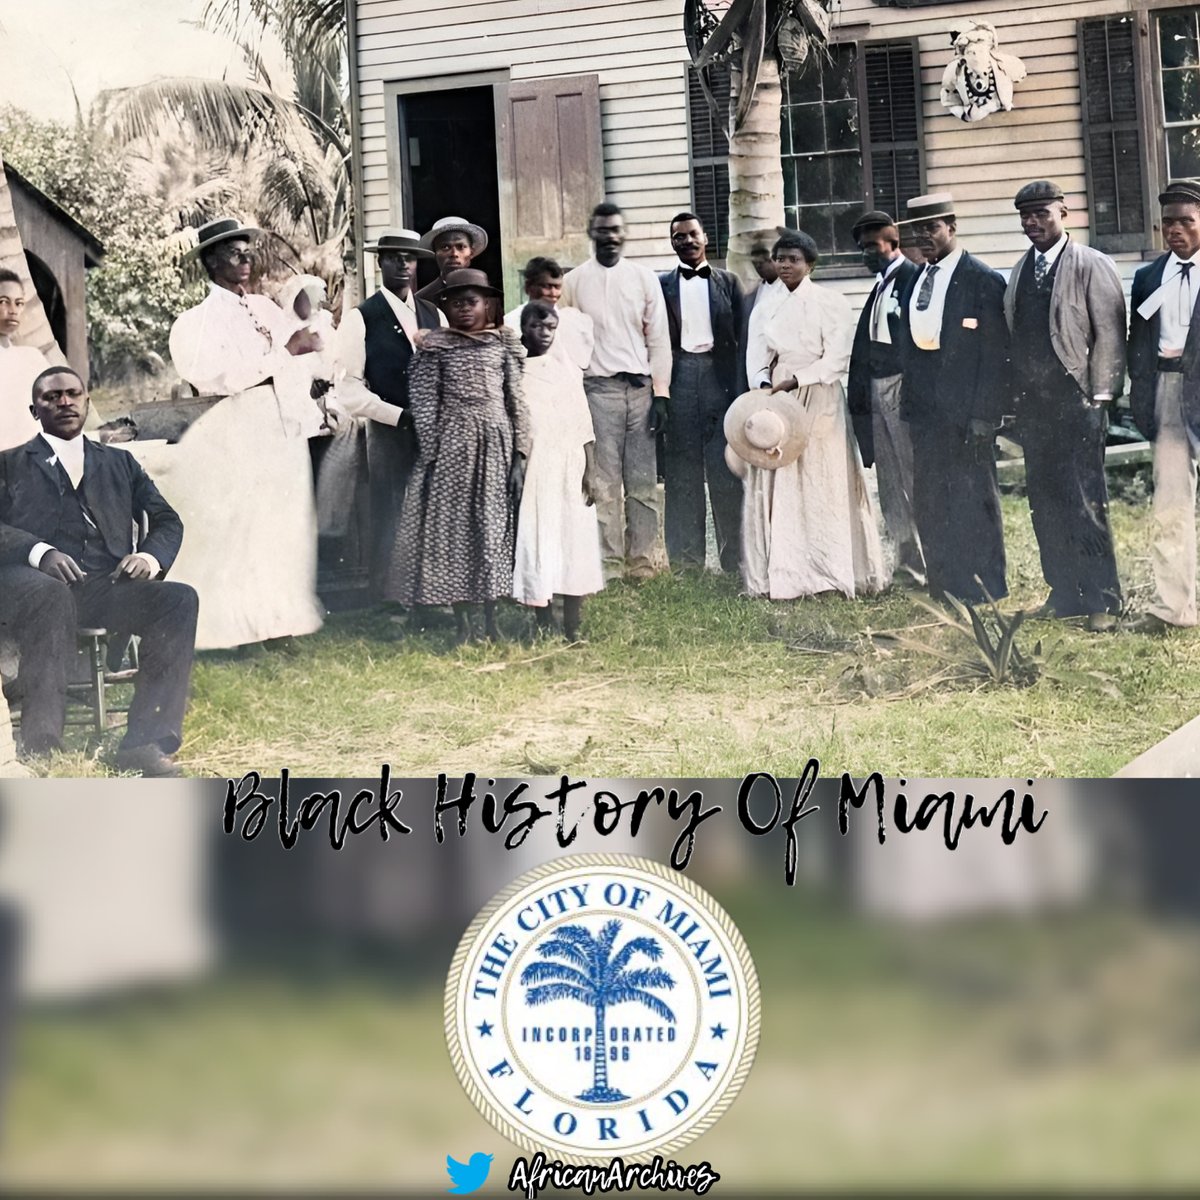 The black history of Miami, Florida. A THREAD! Bahamians were among the first settlers in Miami. The first name on the city charter in 1896, when the city was incorporated, was a Black man named Silas Austin. Out of 368 men who voted to incorporate Miami,162 of them were Black.